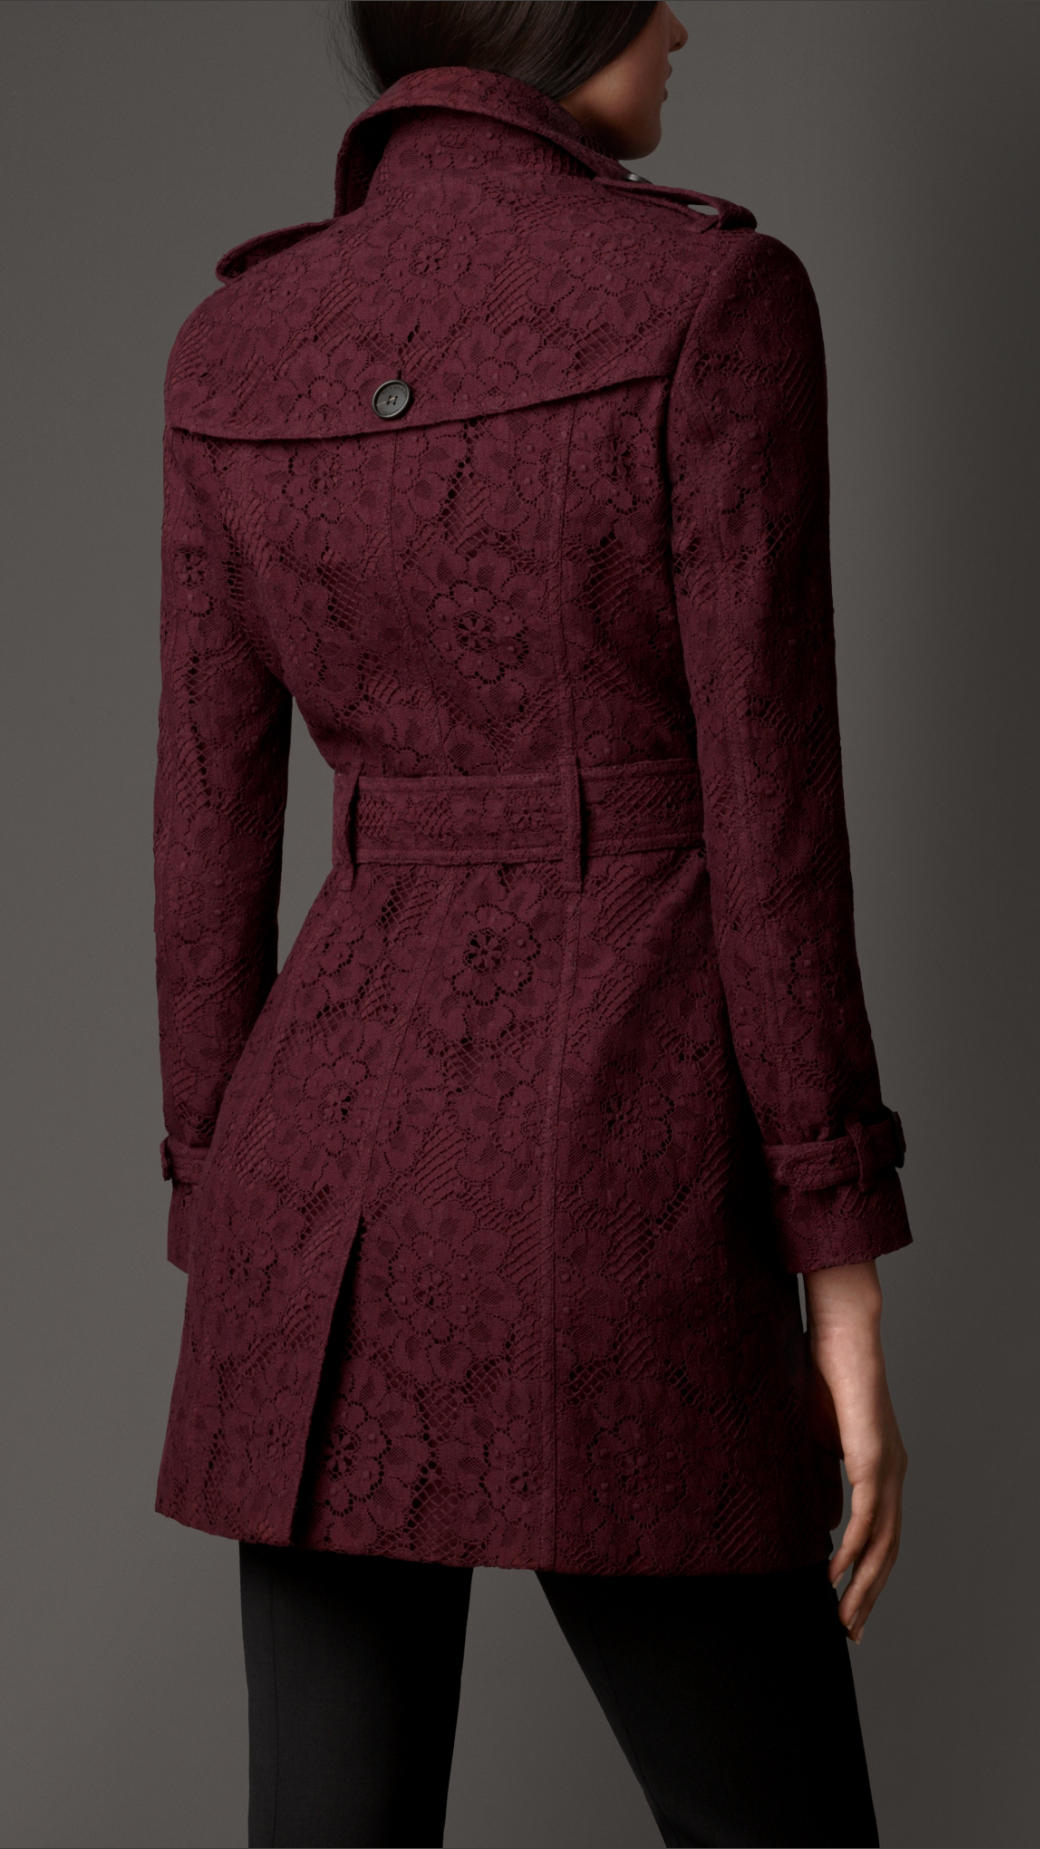 Lyst - Burberry English Floral Lace Trench Coat in Purple